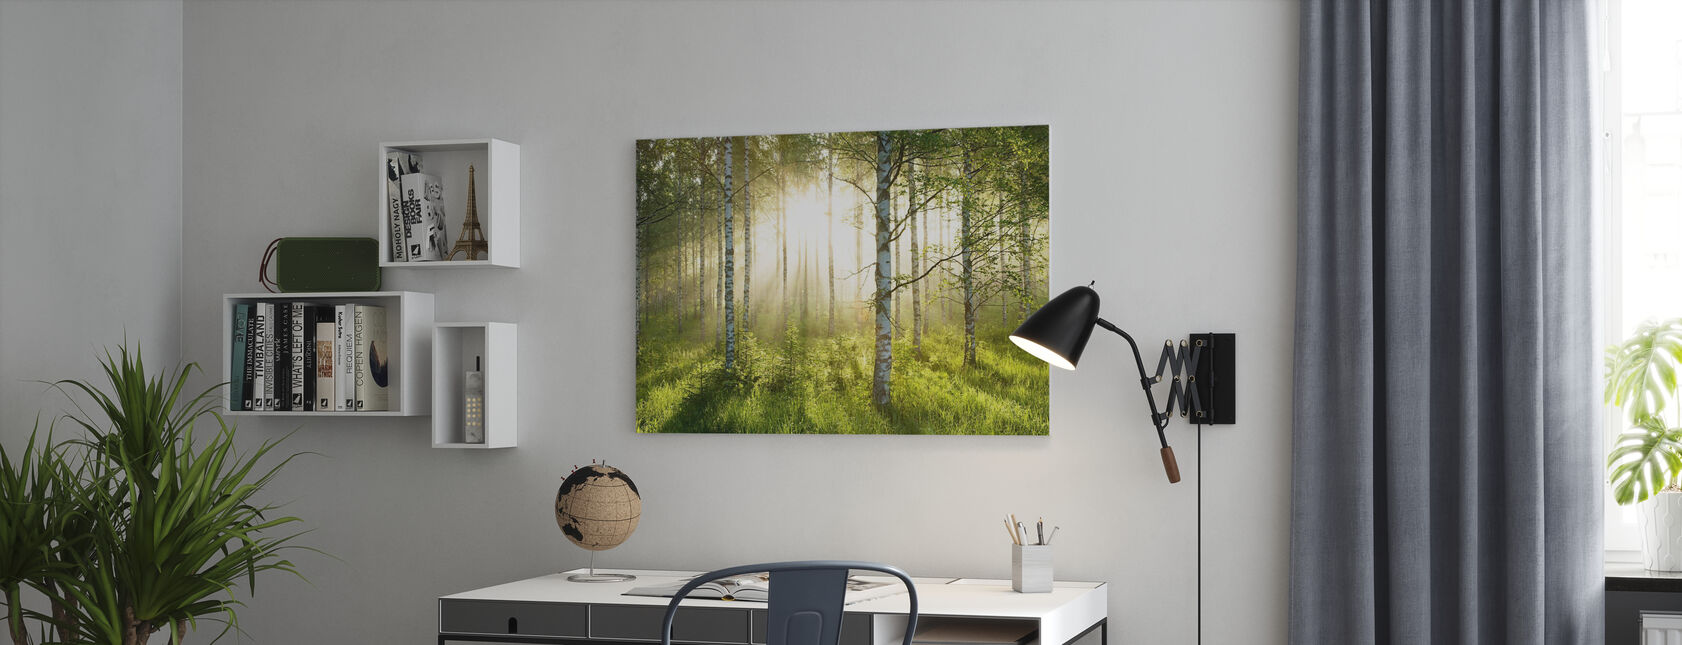 Birch Trees Forest - Canvas print - Office